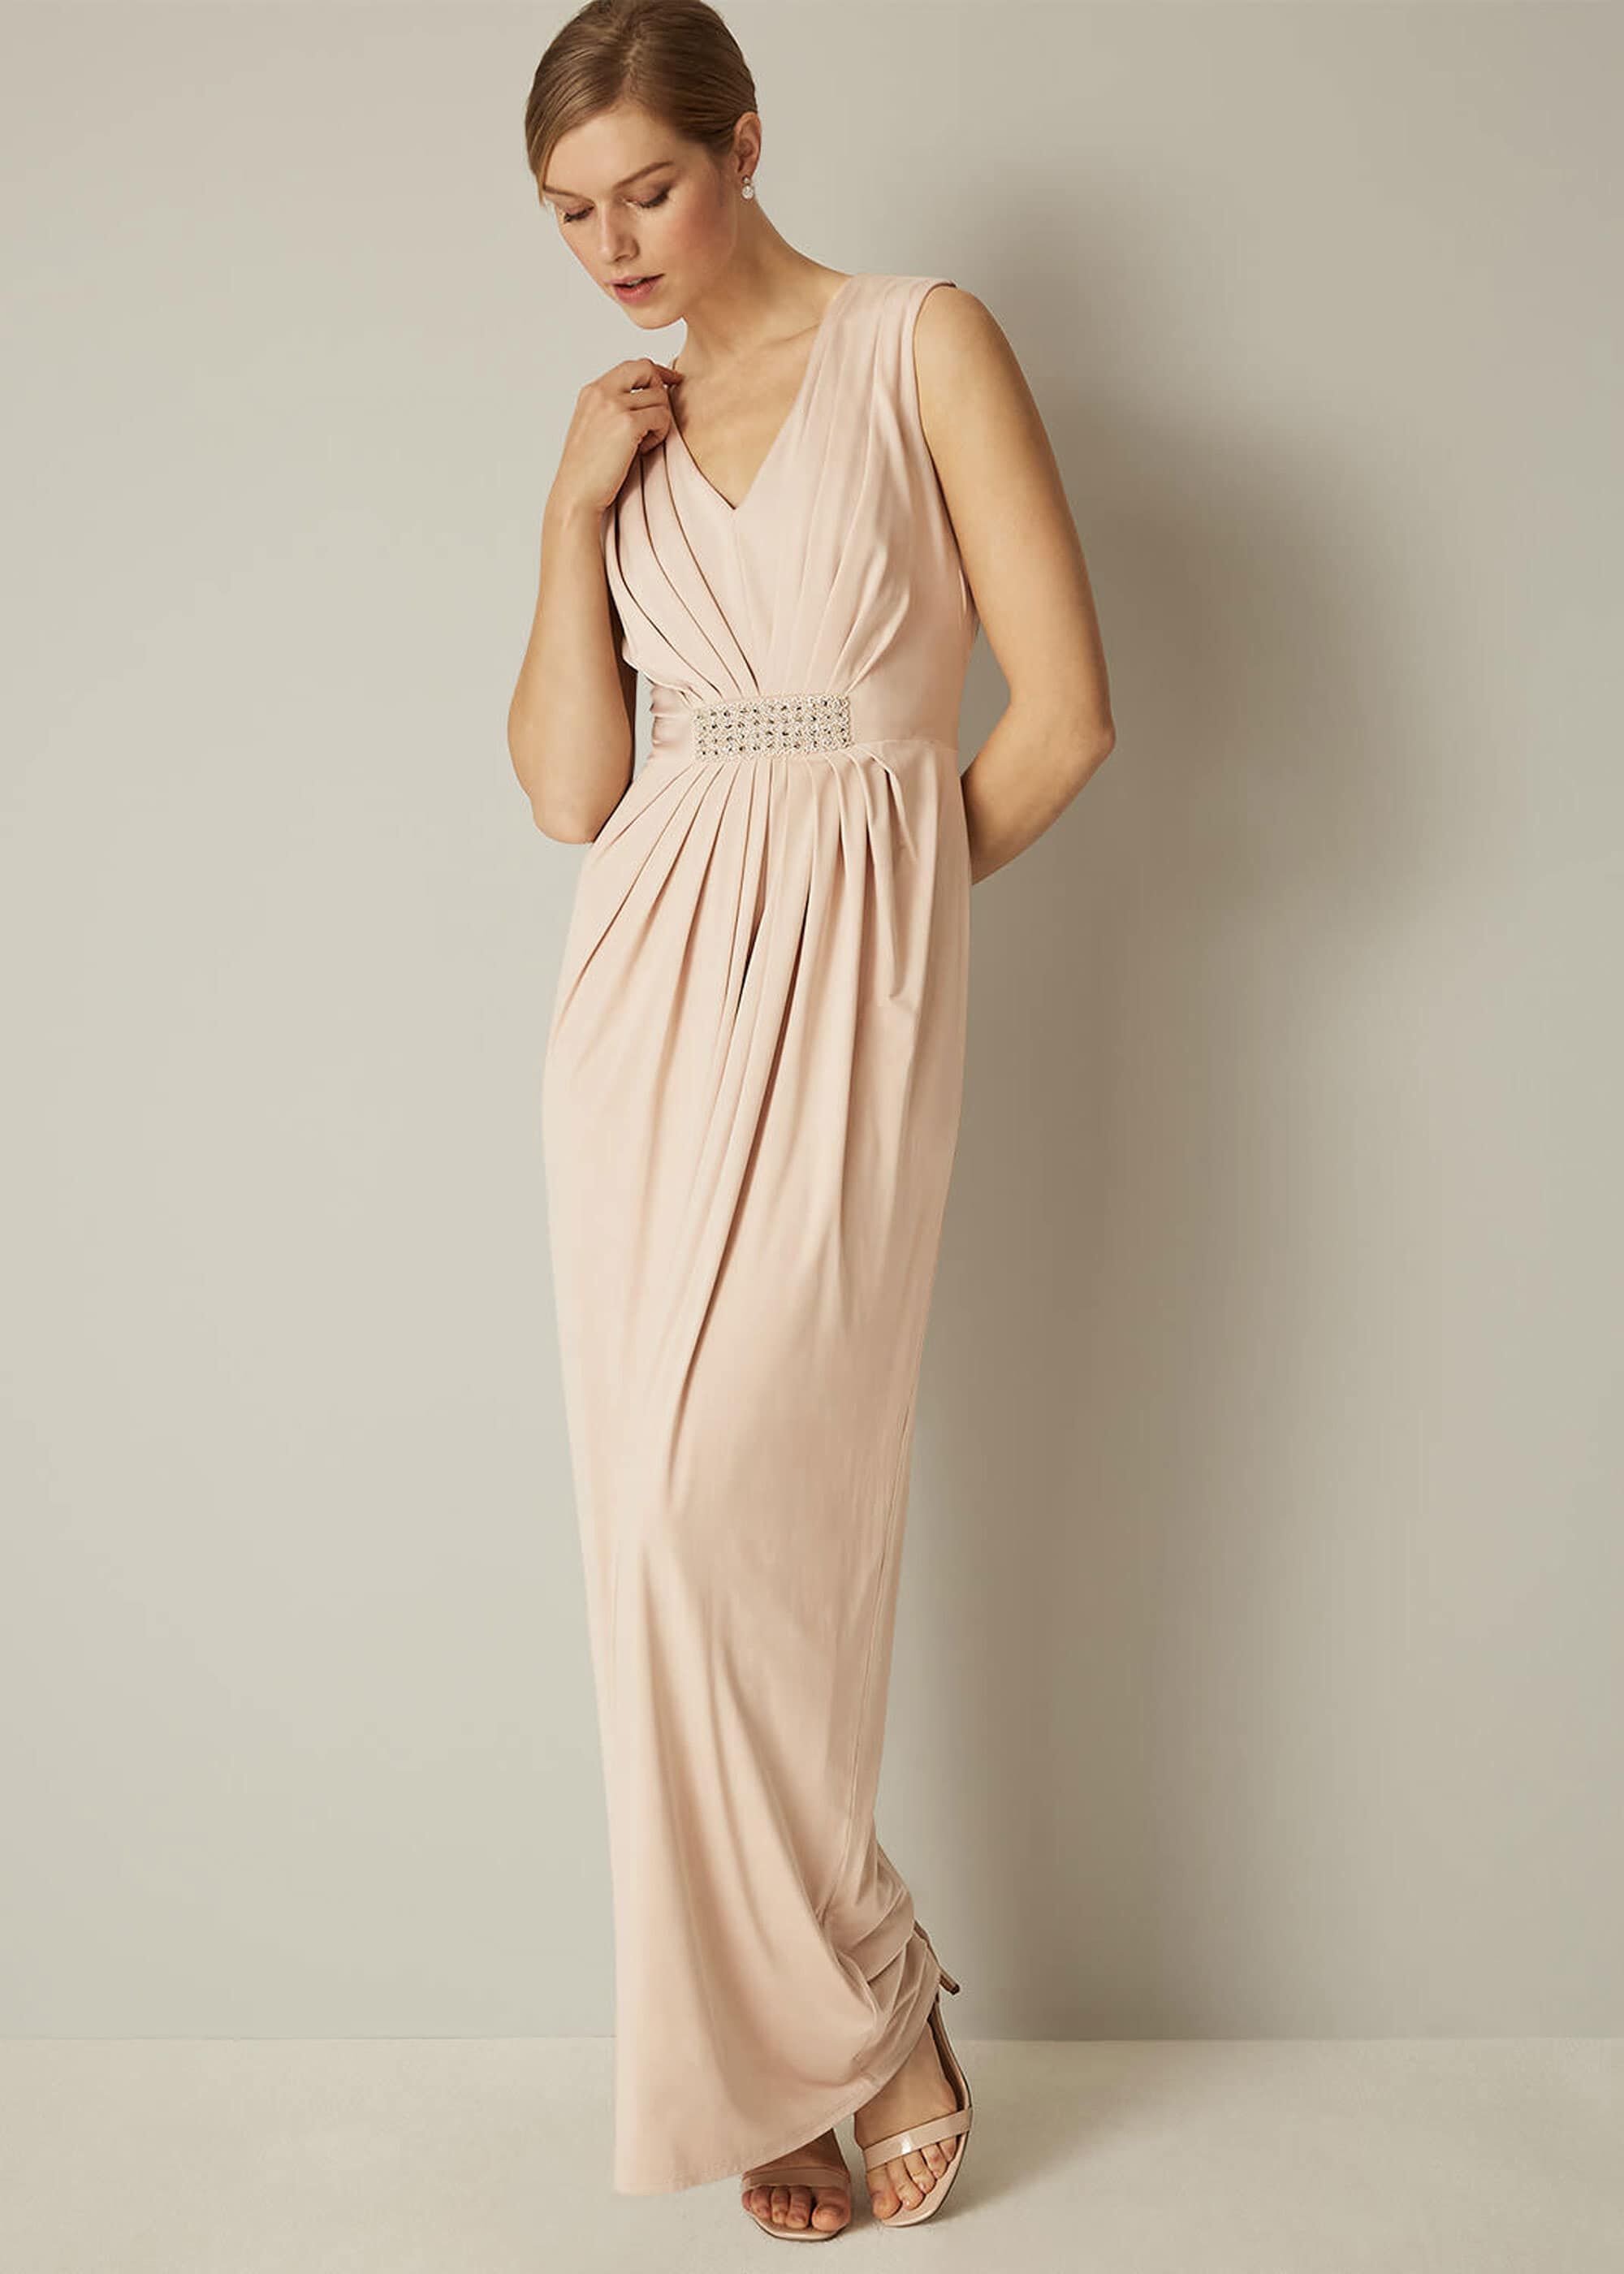 constance sequin embellished maxi bridesmaid dress